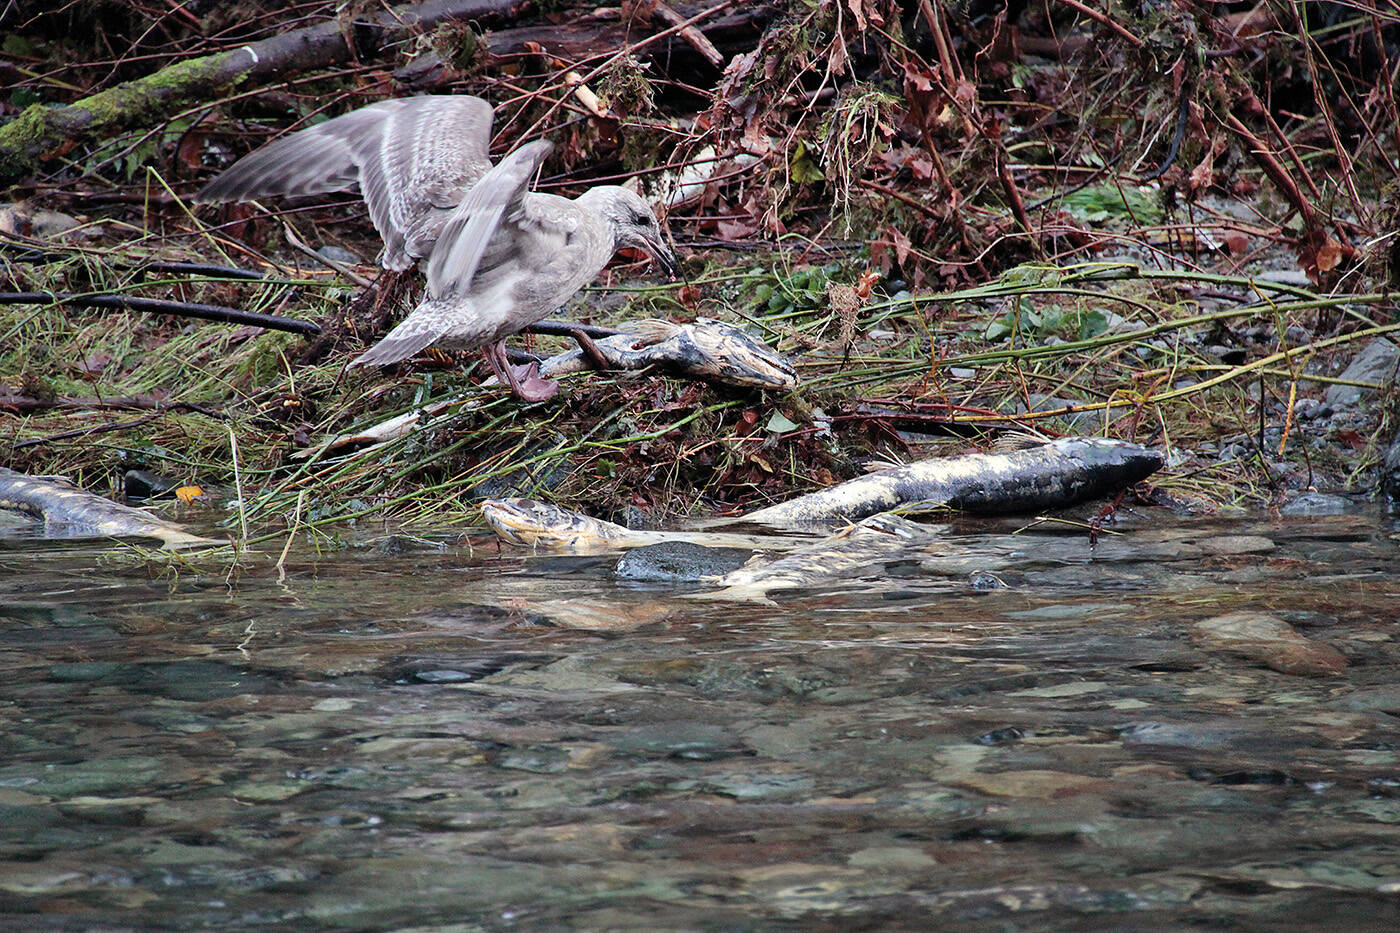 A hungry gull picks away at a dead salmon on the banks of the Goldstream River. The Goldstream Hatchery saw far fewer chum salmon than exected this year due to weather extremes, experts say. (Black Press Media file photo)